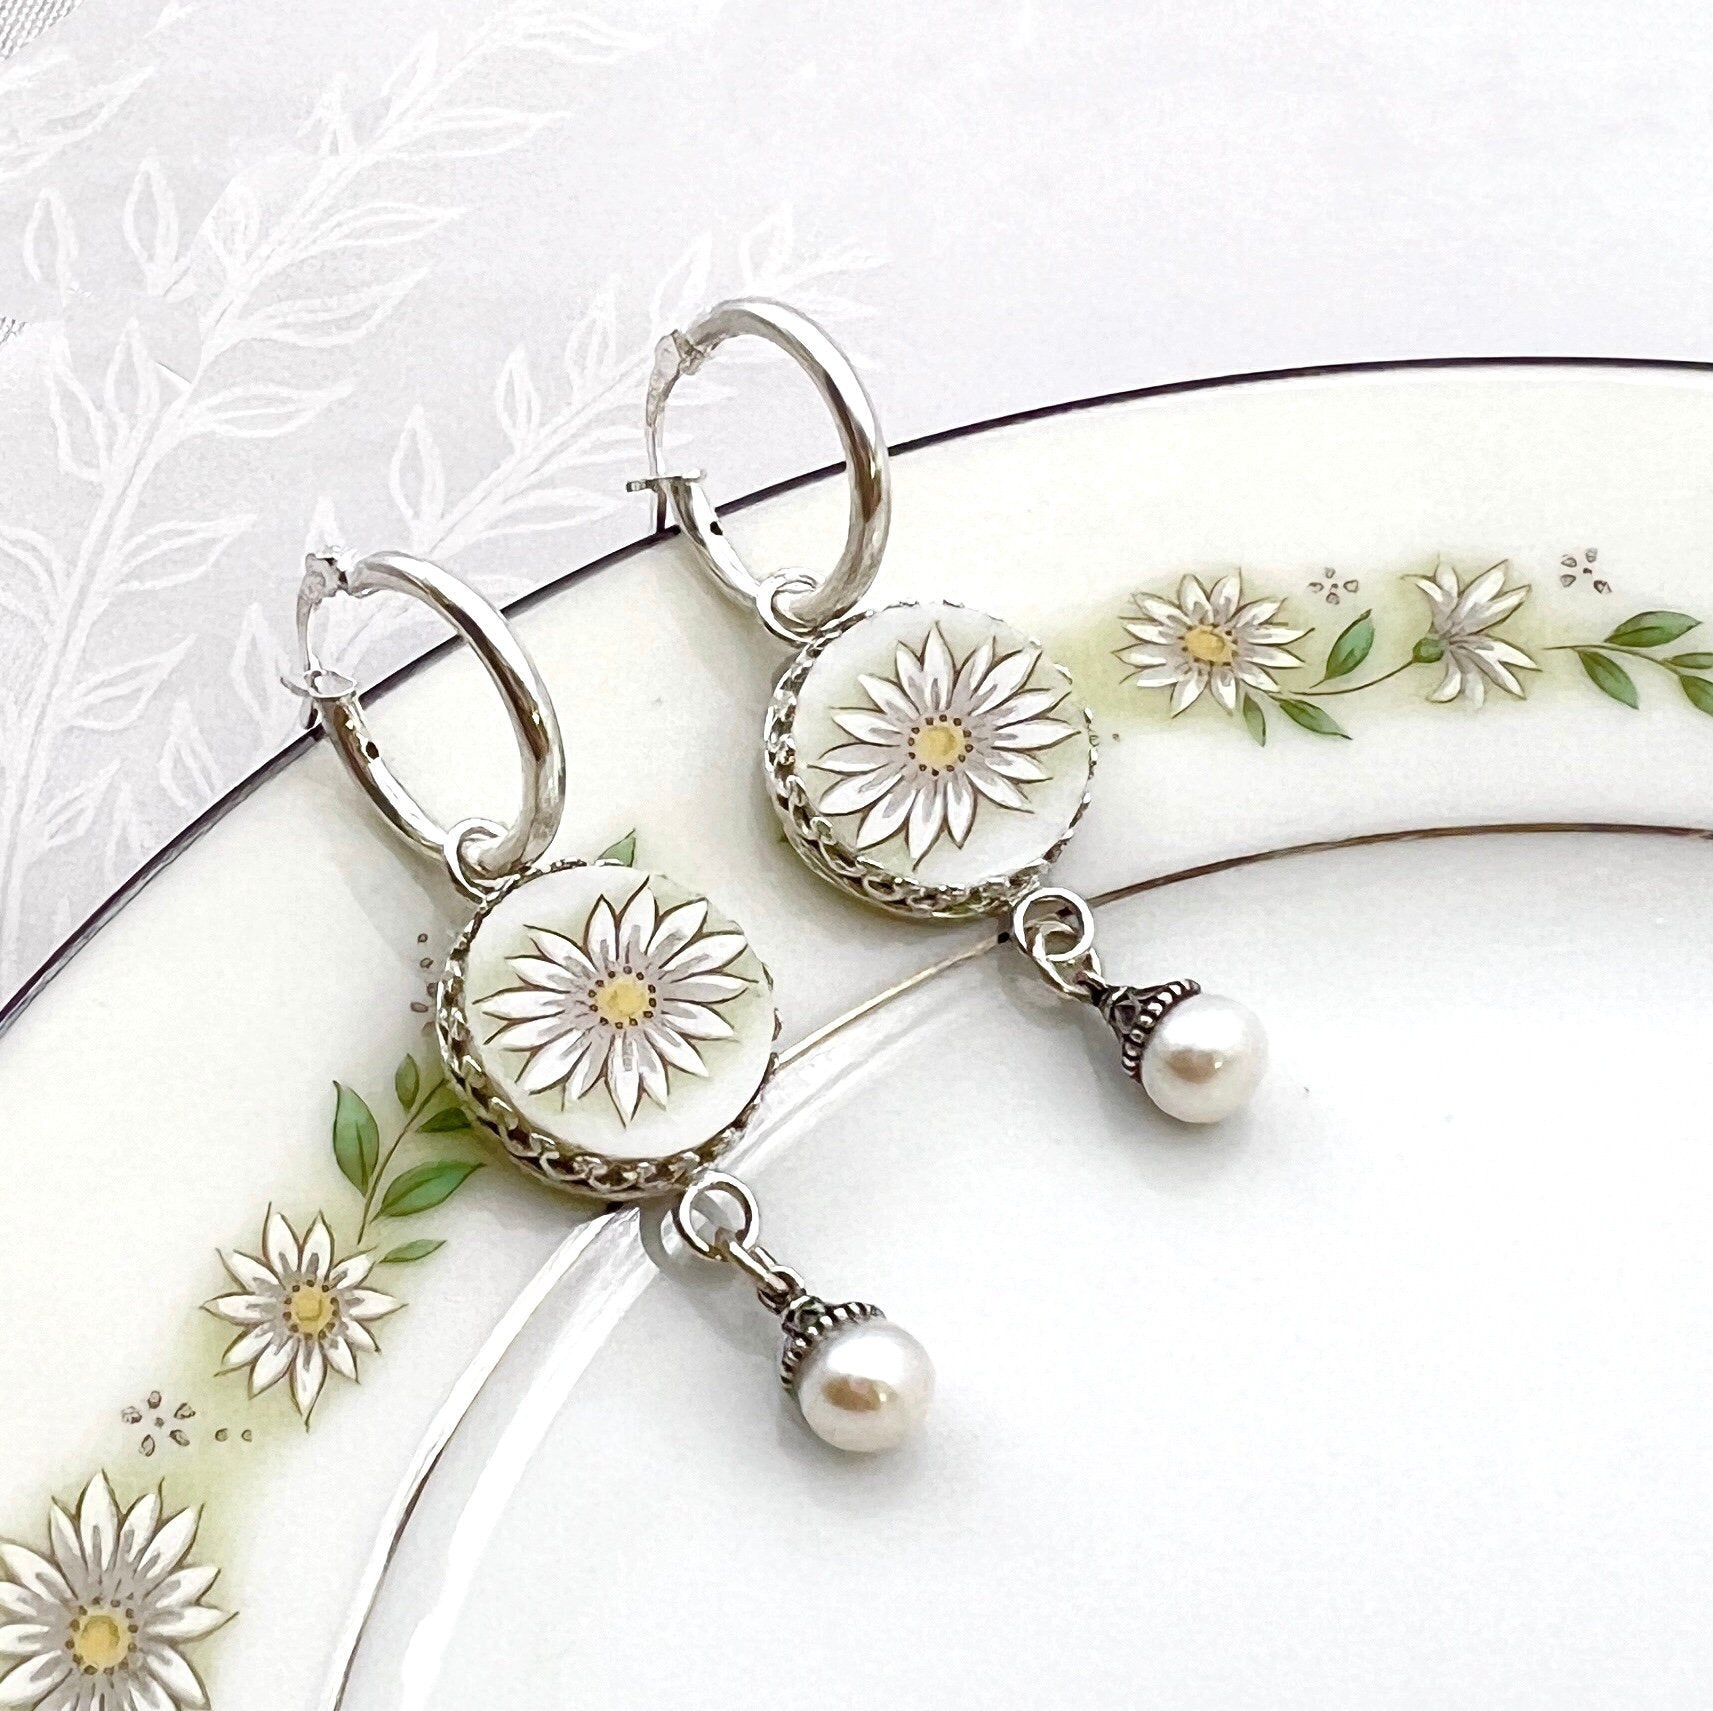 Daisy Sterling Silver Hoop Earrings, Unique 20th Anniversary Gift for Wife, Broken China Jewelry, Pearl Drop Earrings, Gifts for Women